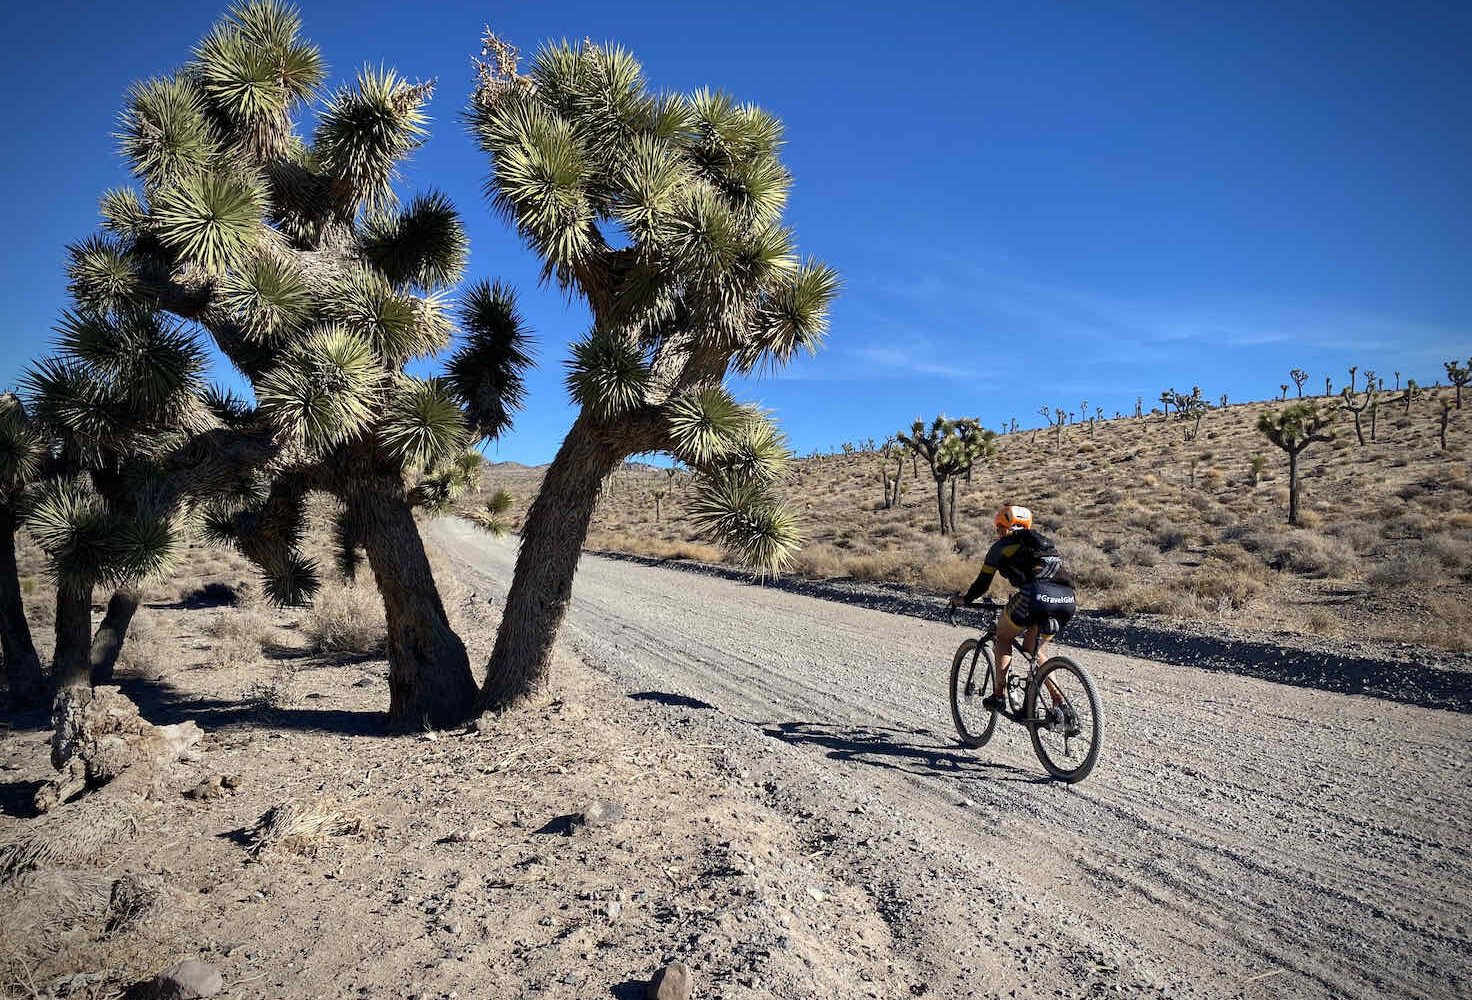 Gravel cyclist with Joshua Tree in foreground.